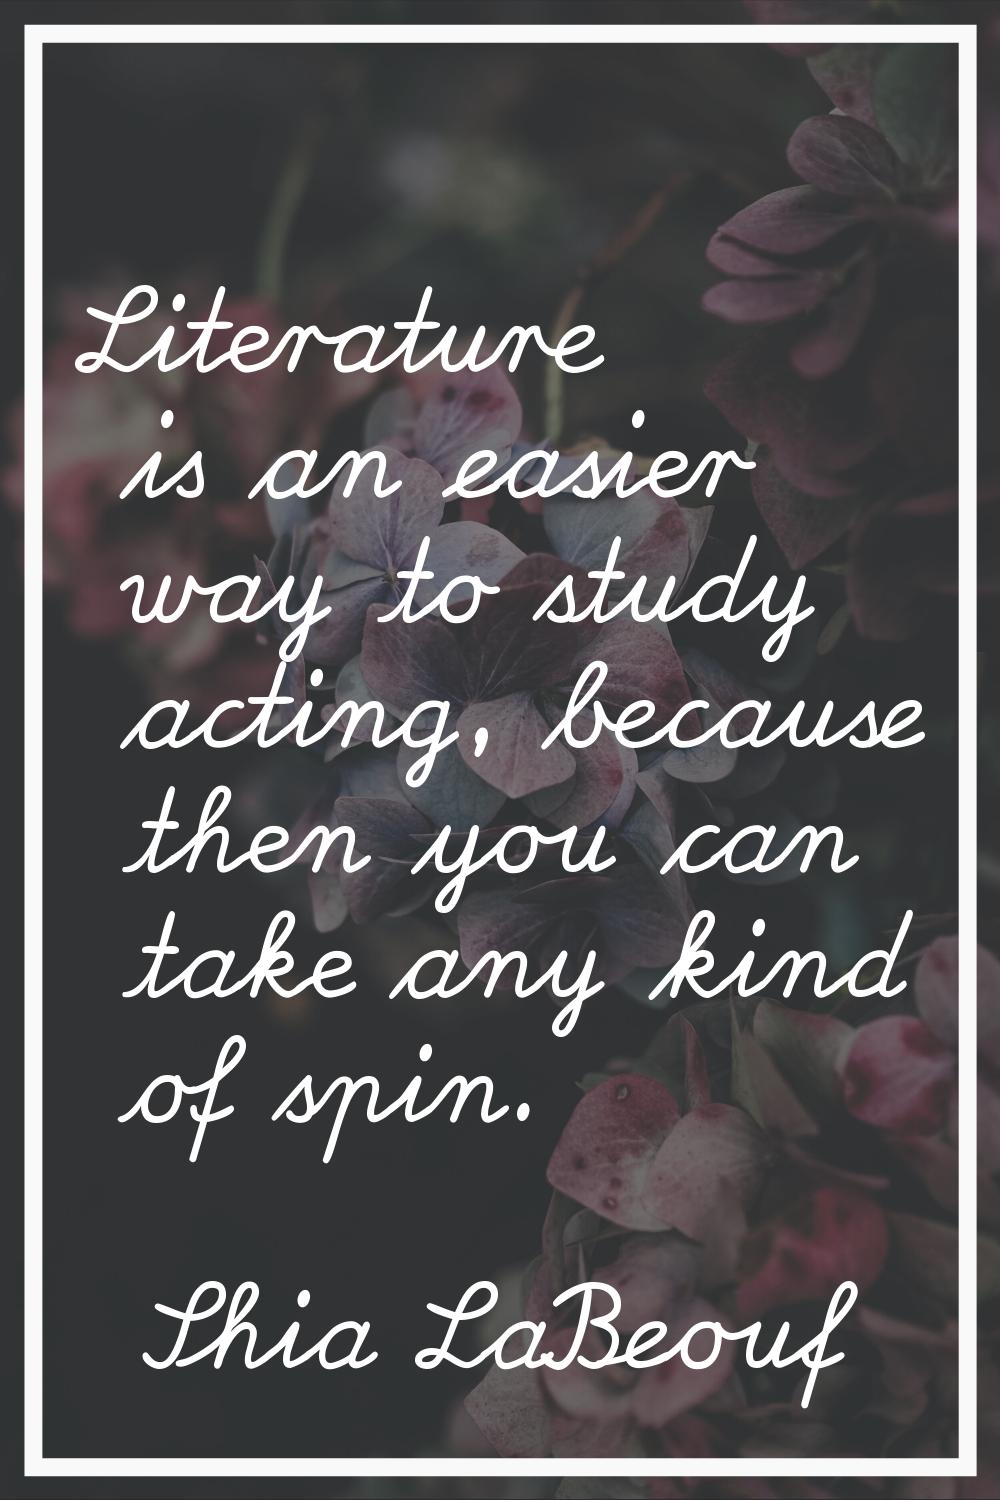 Literature is an easier way to study acting, because then you can take any kind of spin.